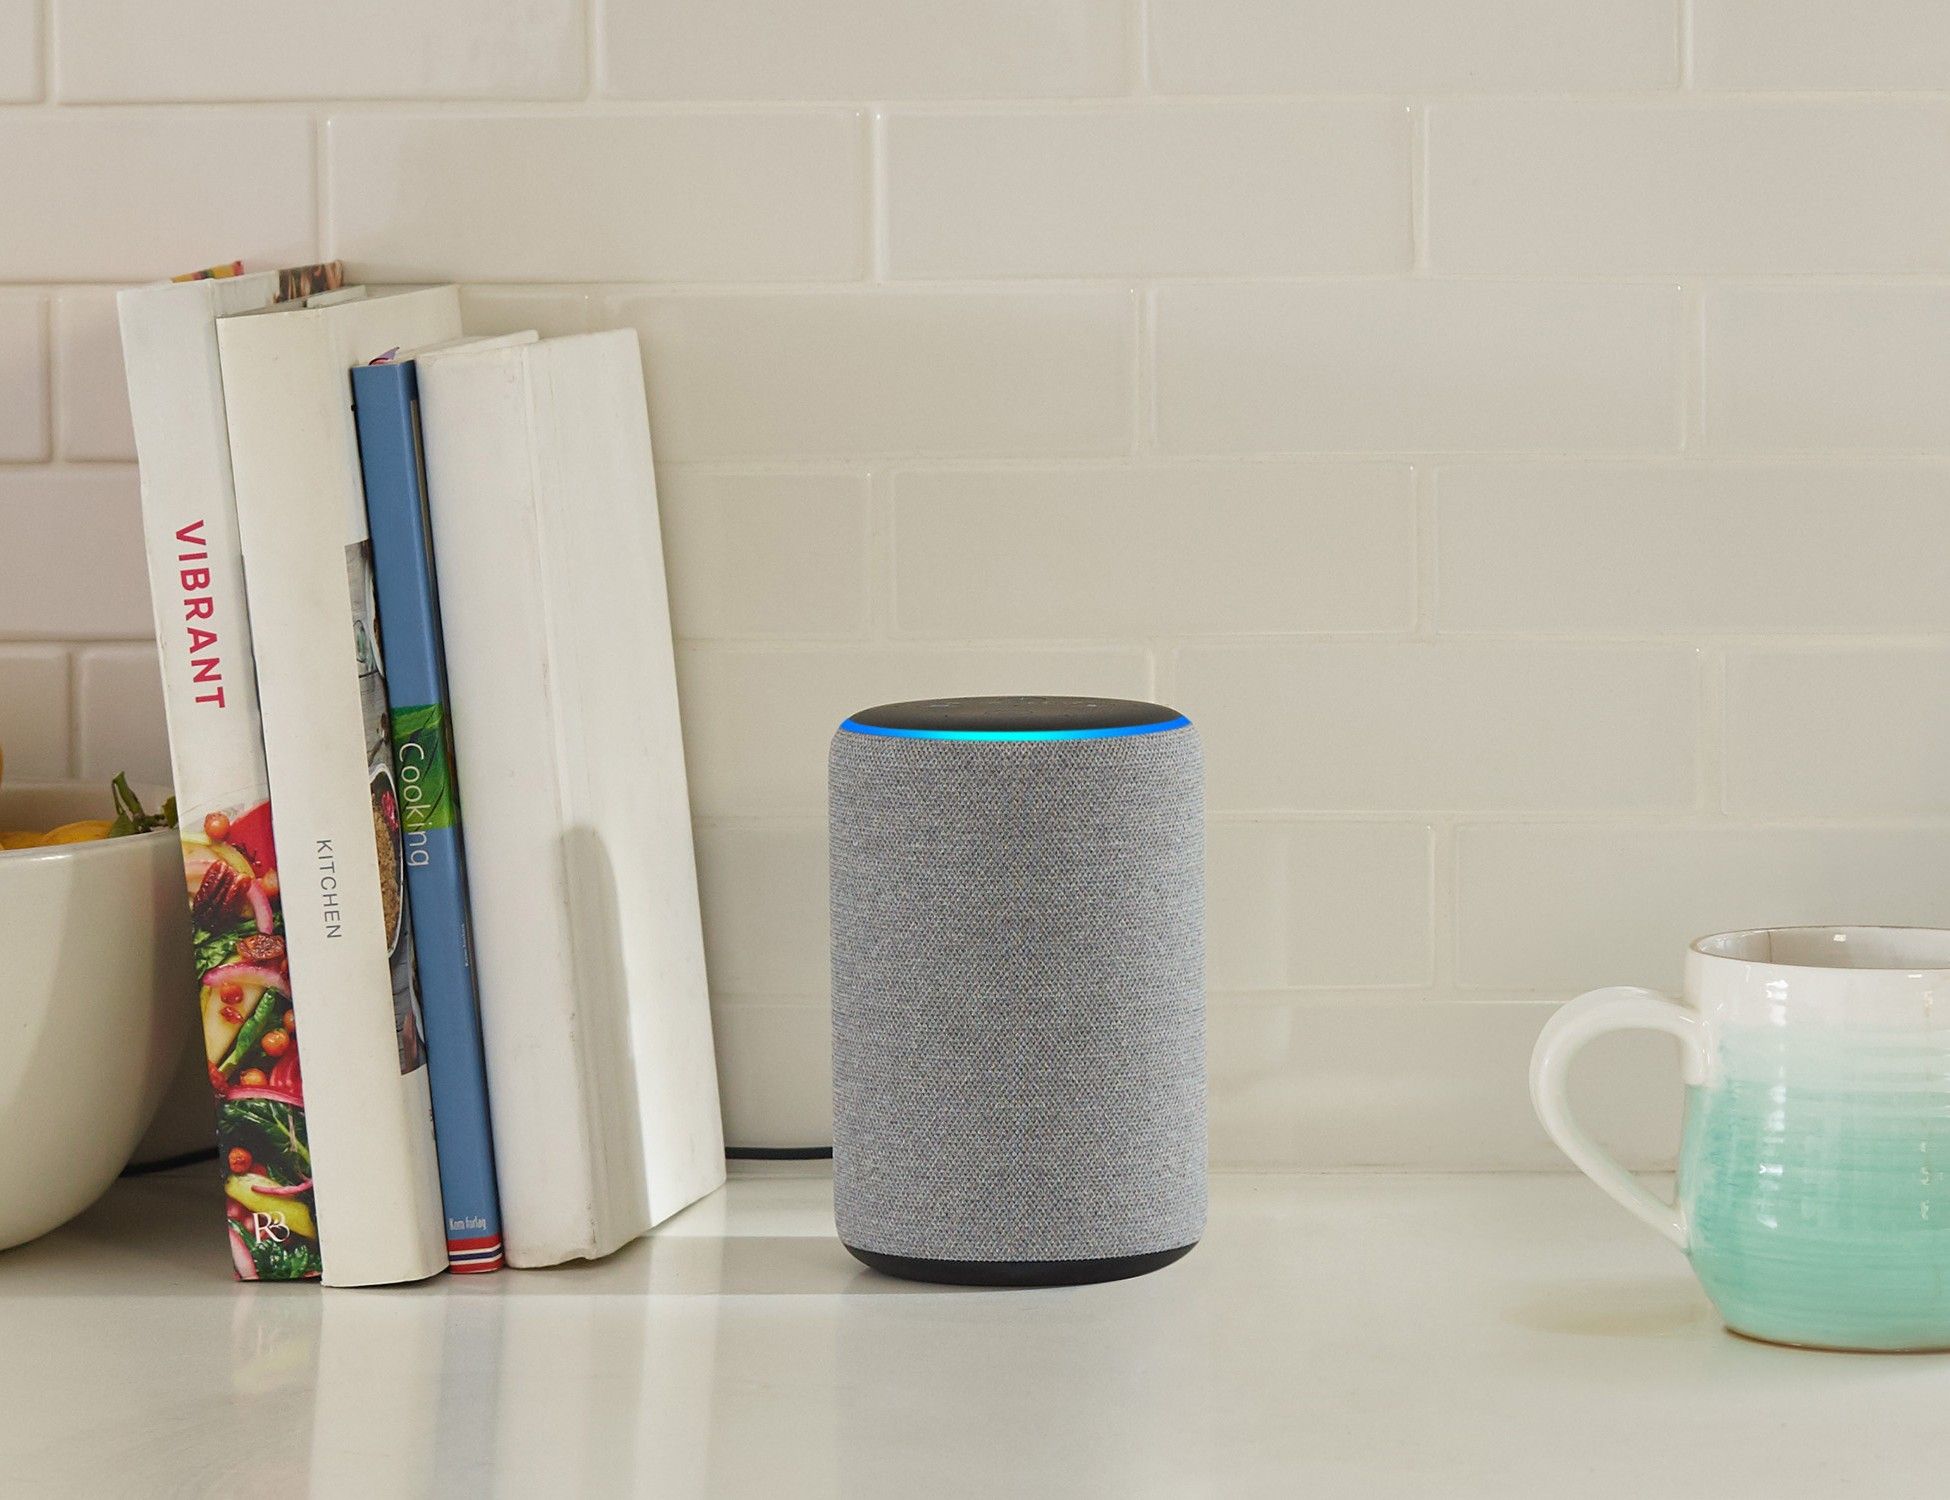 Echo Plus on counter with books and a coffee mug